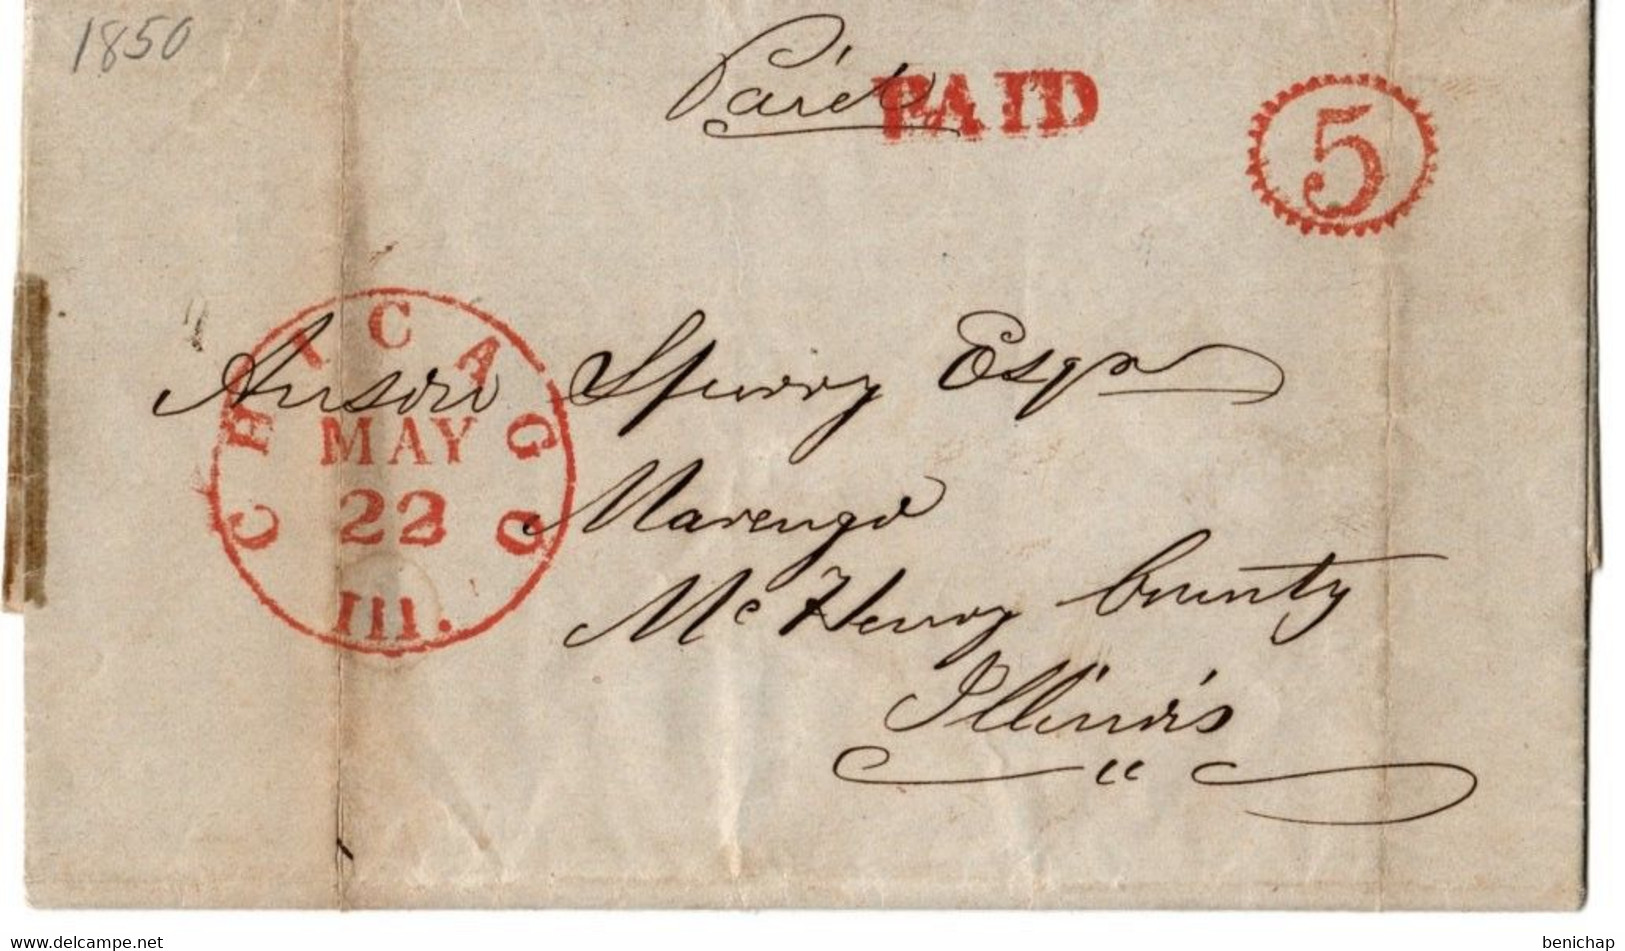 (R78) USA Préphilatélie - Stampless Cover 1850 - Red Postal Marking Paid And Chicago - Red Numeral 5 Cents - 1850. - …-1845 Prephilately